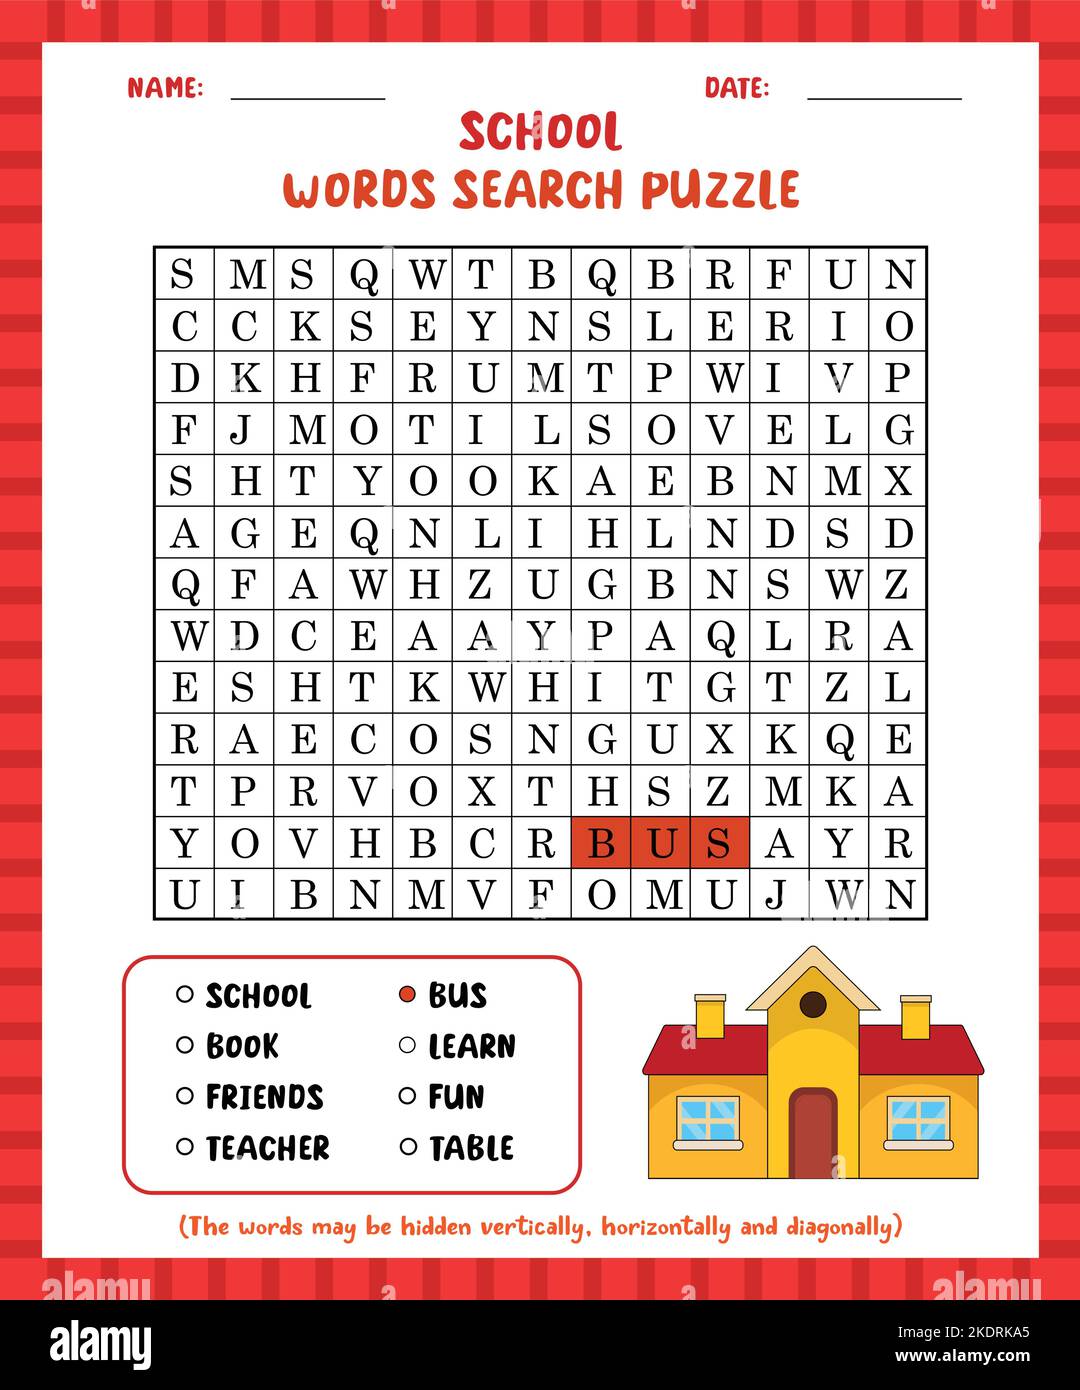 Crossword Puzzle, 2023 New Matching Letter Game, Wooden Blocks Spelling  Game, Premium Wooden Alphabet Flash Cards Matching Sight Words Letters